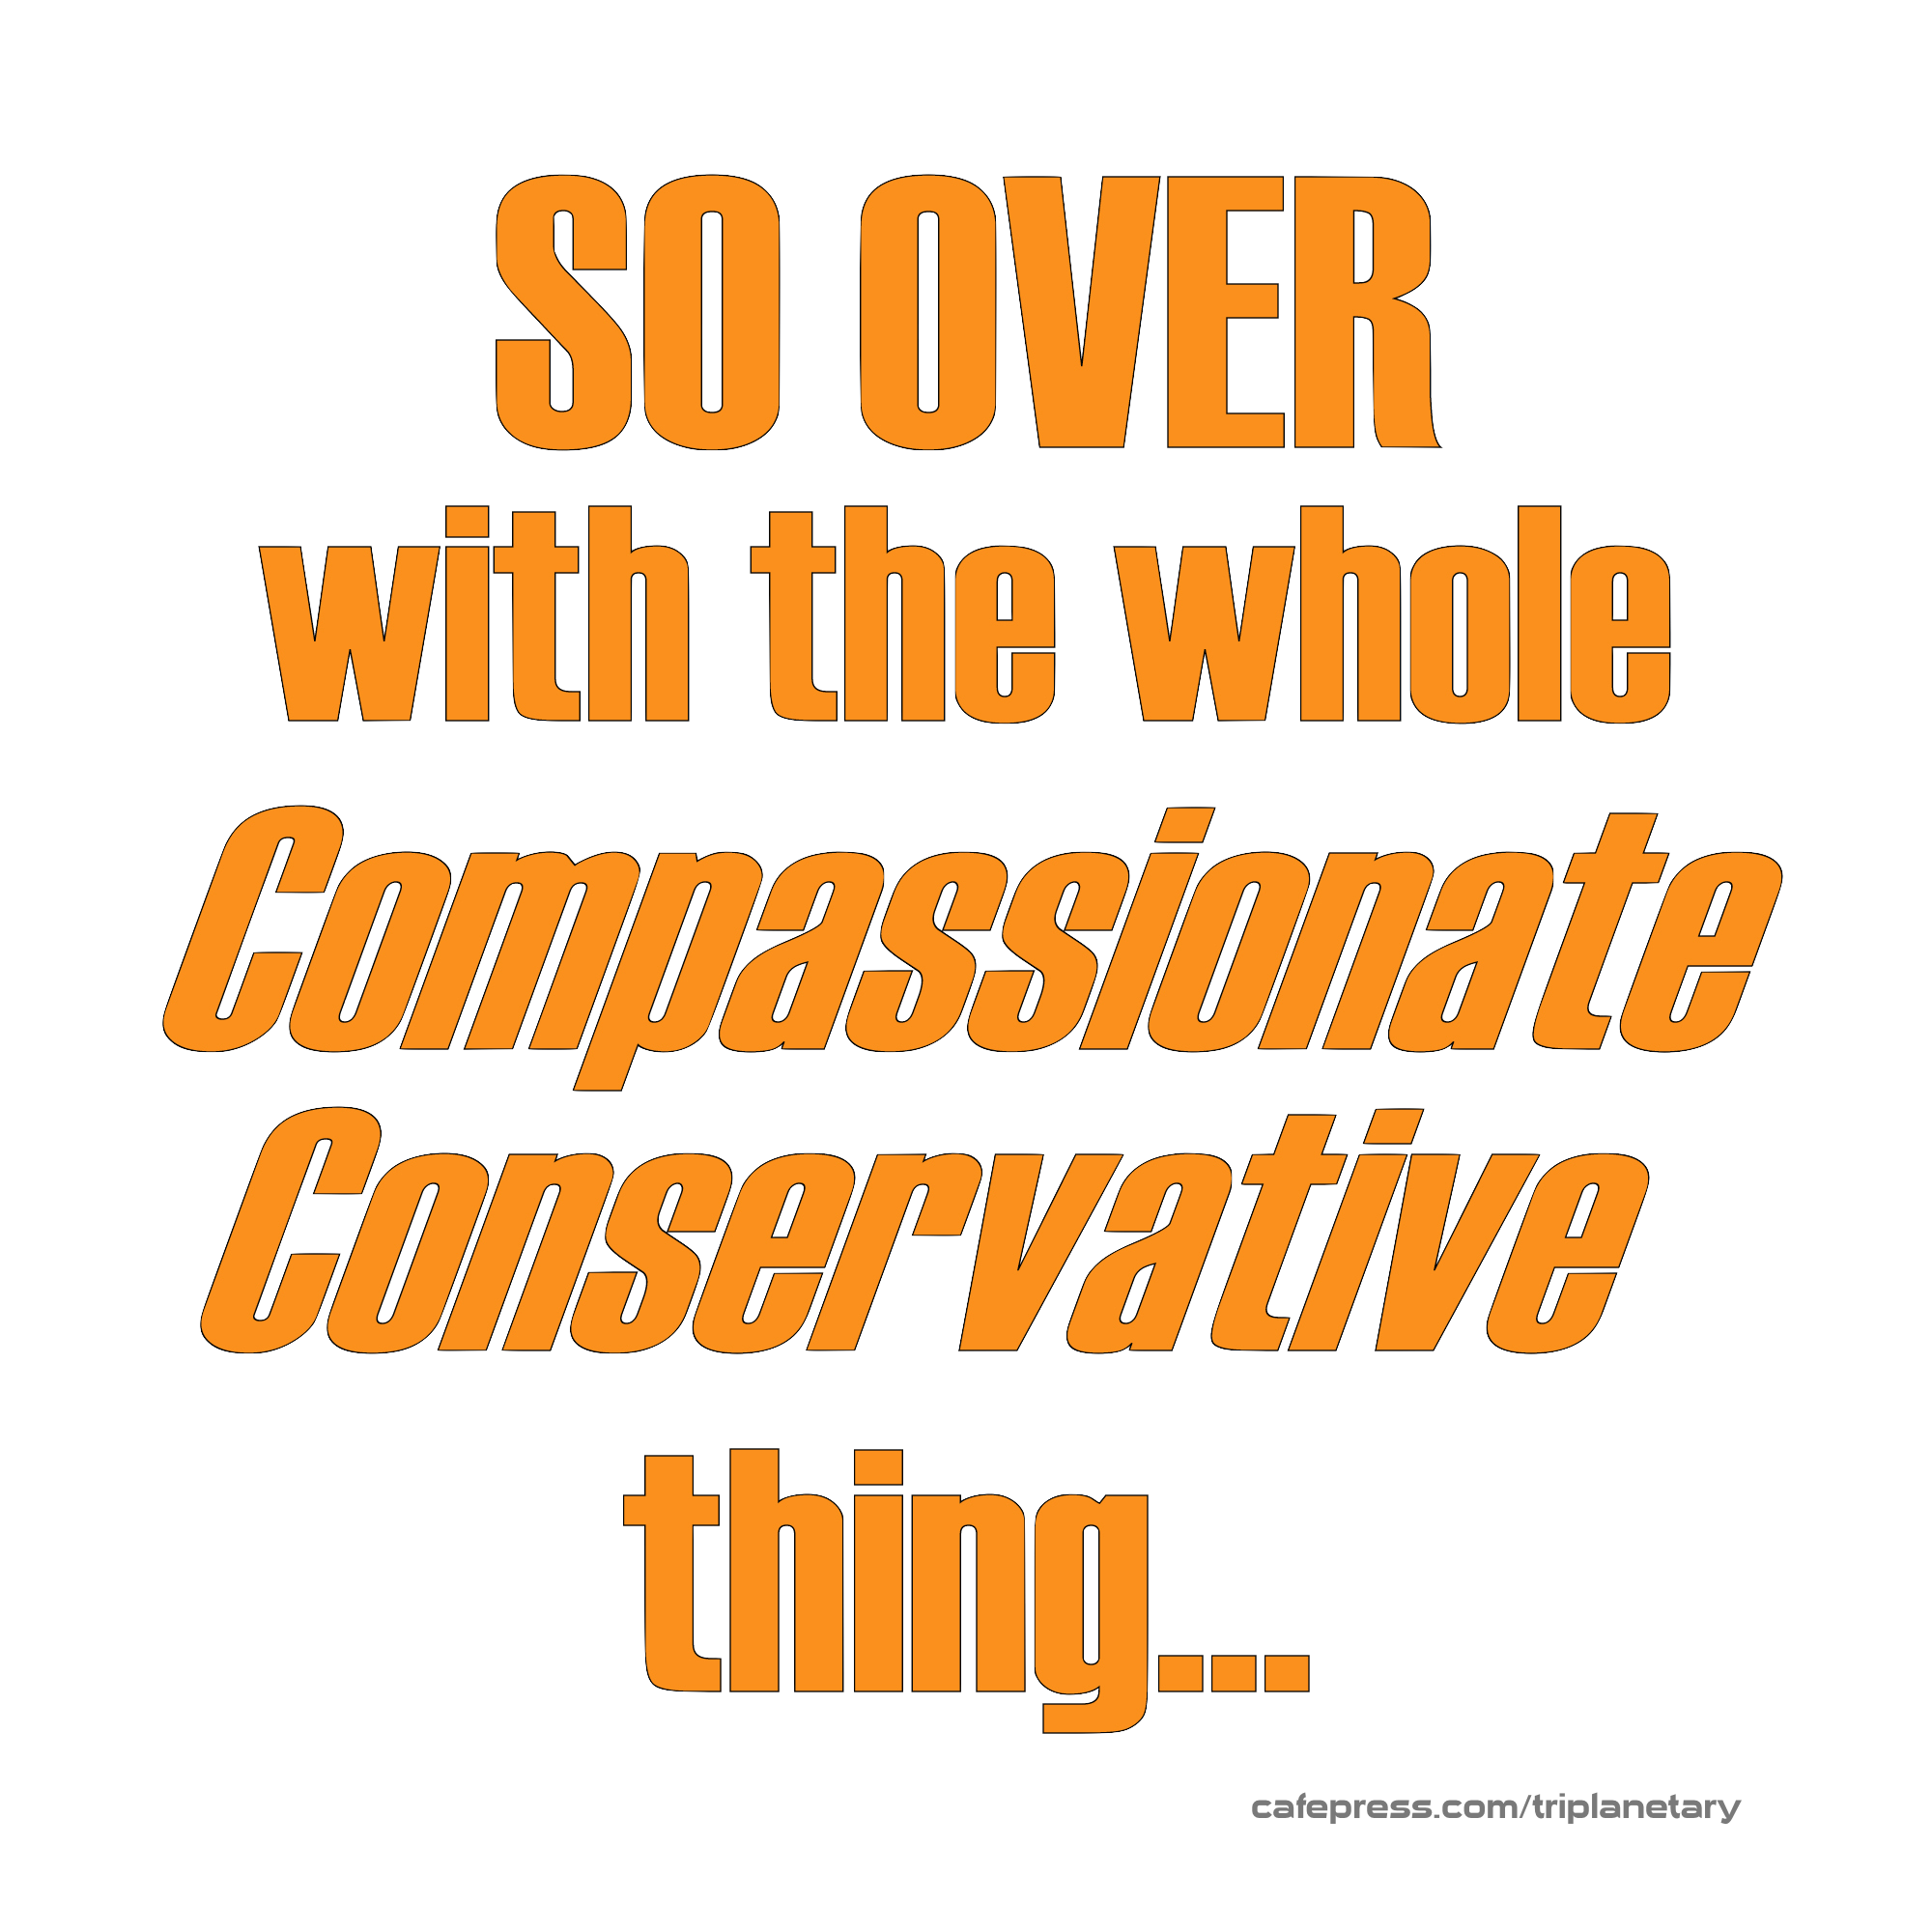 Orange and white image reading So Over the Whole Compassionate Conservative Thing